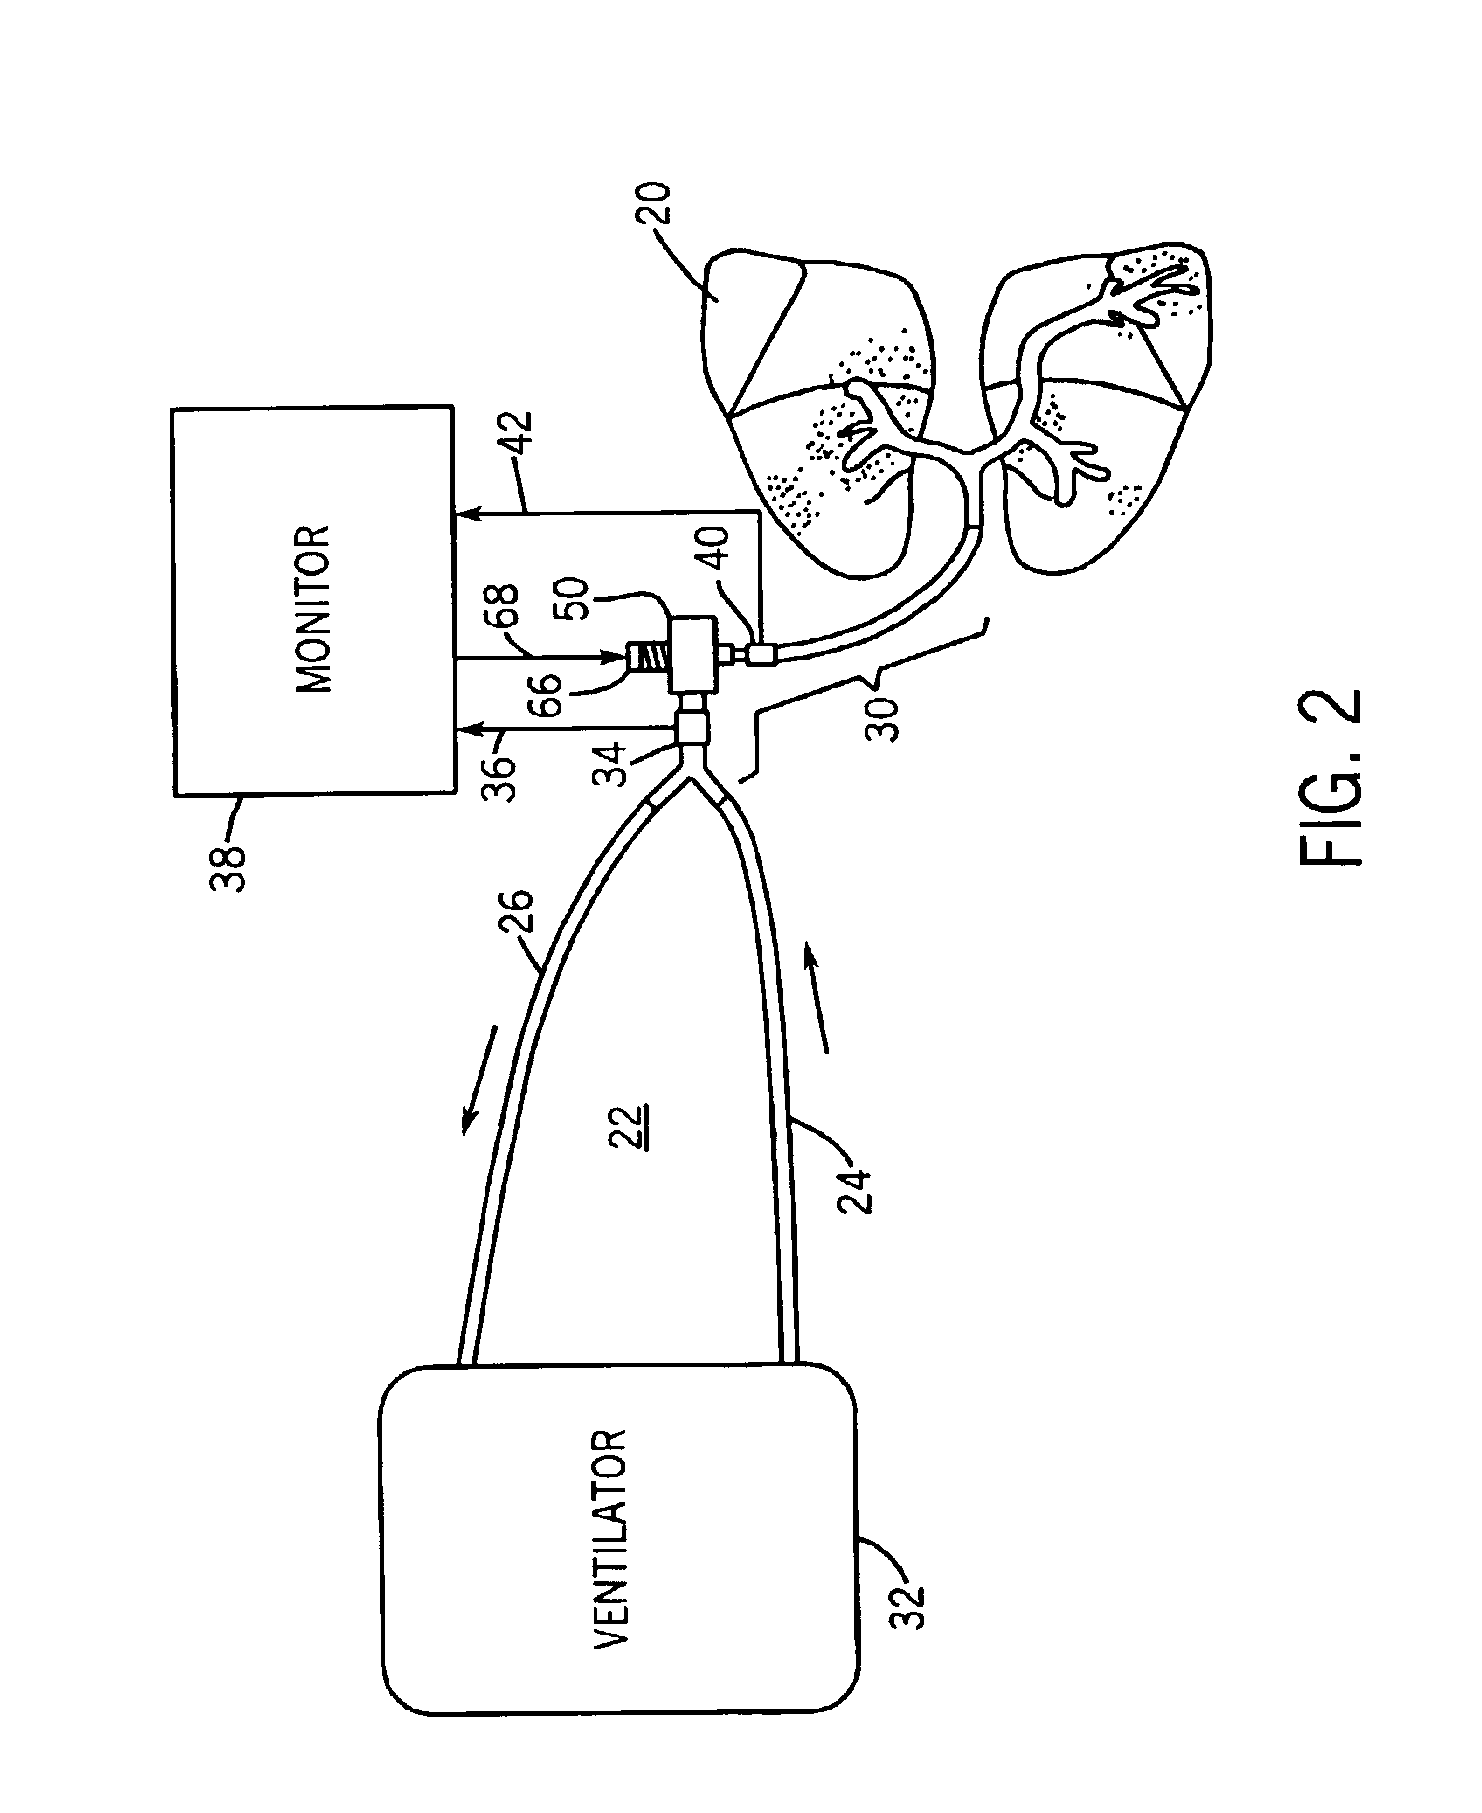 Apparatus and method for use in non-invasively determining conditions in the circulatory system of a subject